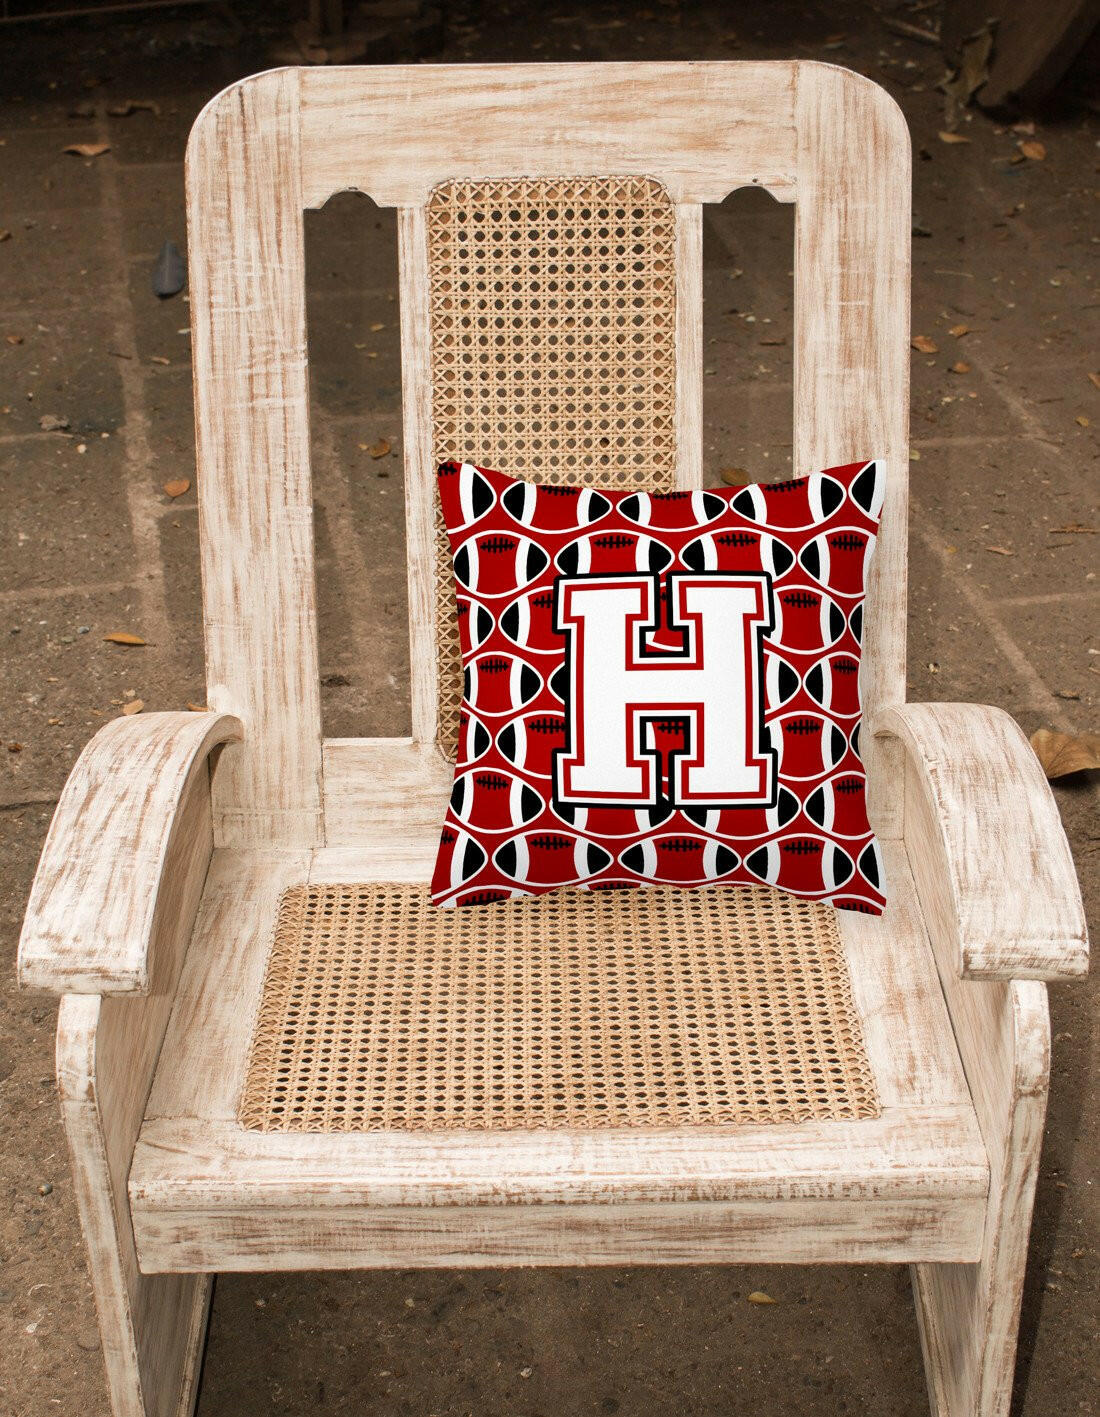 Letter H Football Cardinal and White Fabric Decorative Pillow CJ1082-HPW1414 by Caroline's Treasures